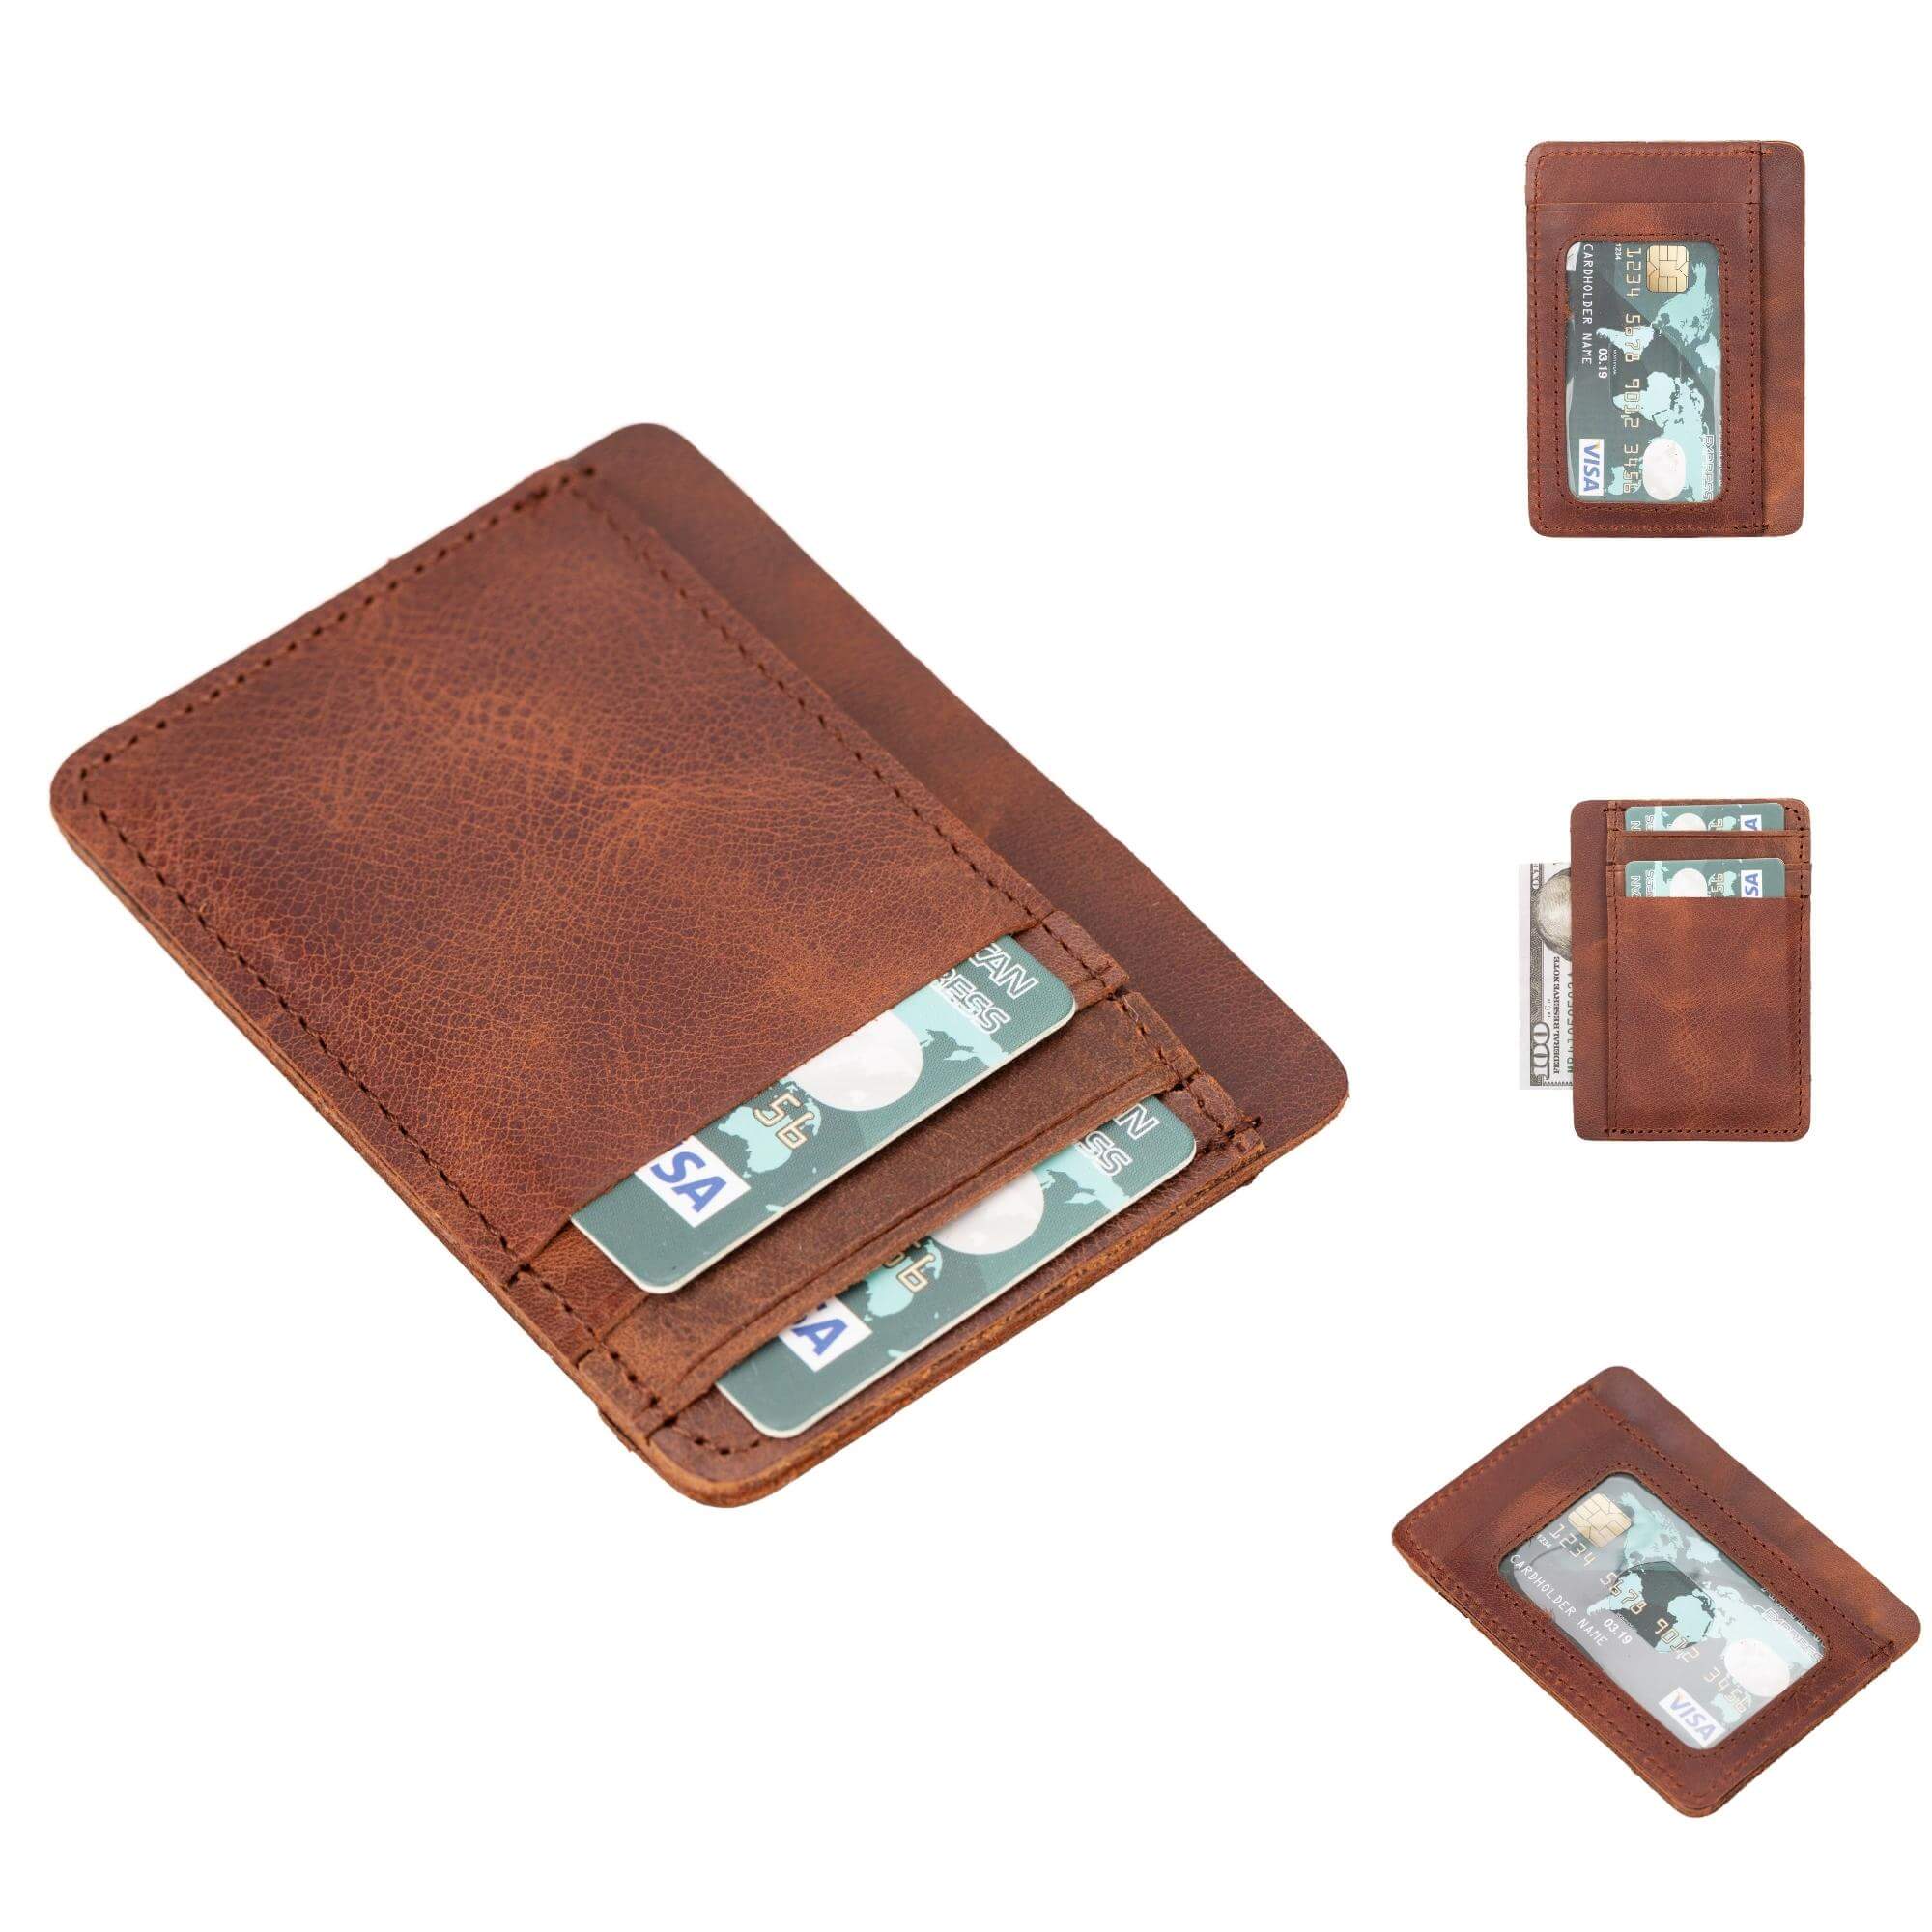 Cody Leather Card Holder and Wallet for Unisex - Walnut - TORONATA